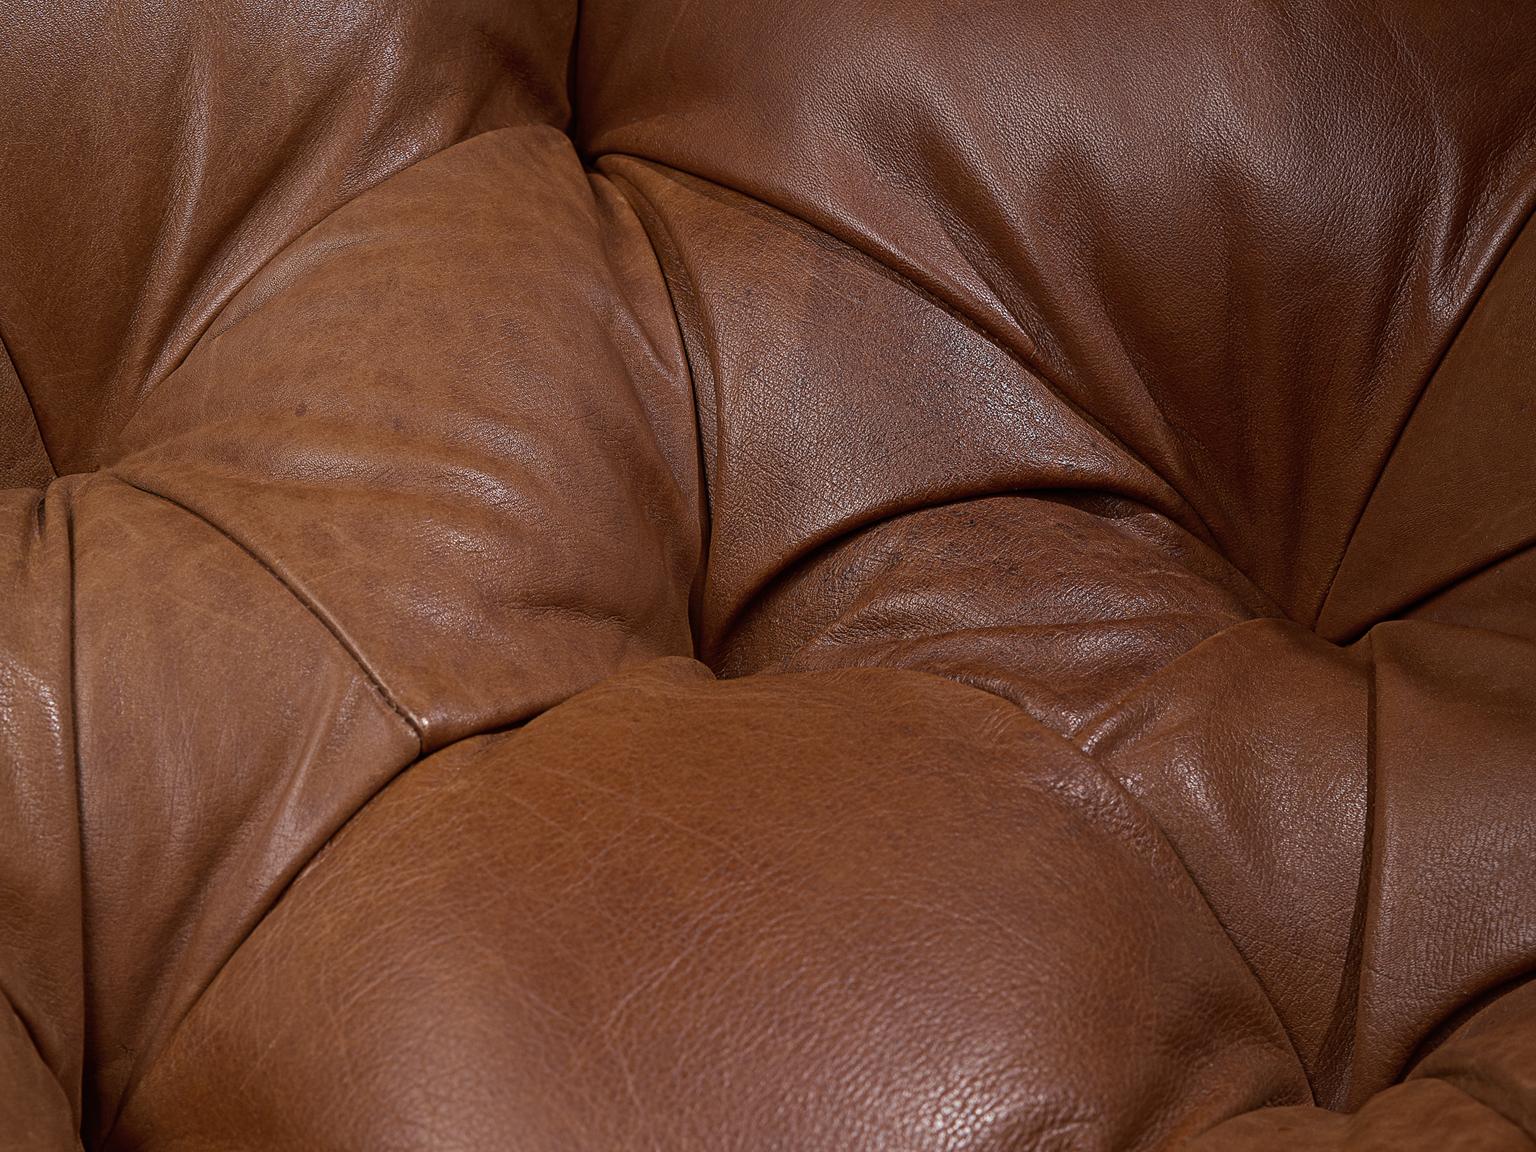 Percival Lafer Sofa in Rosewood and Cognac Leather 3